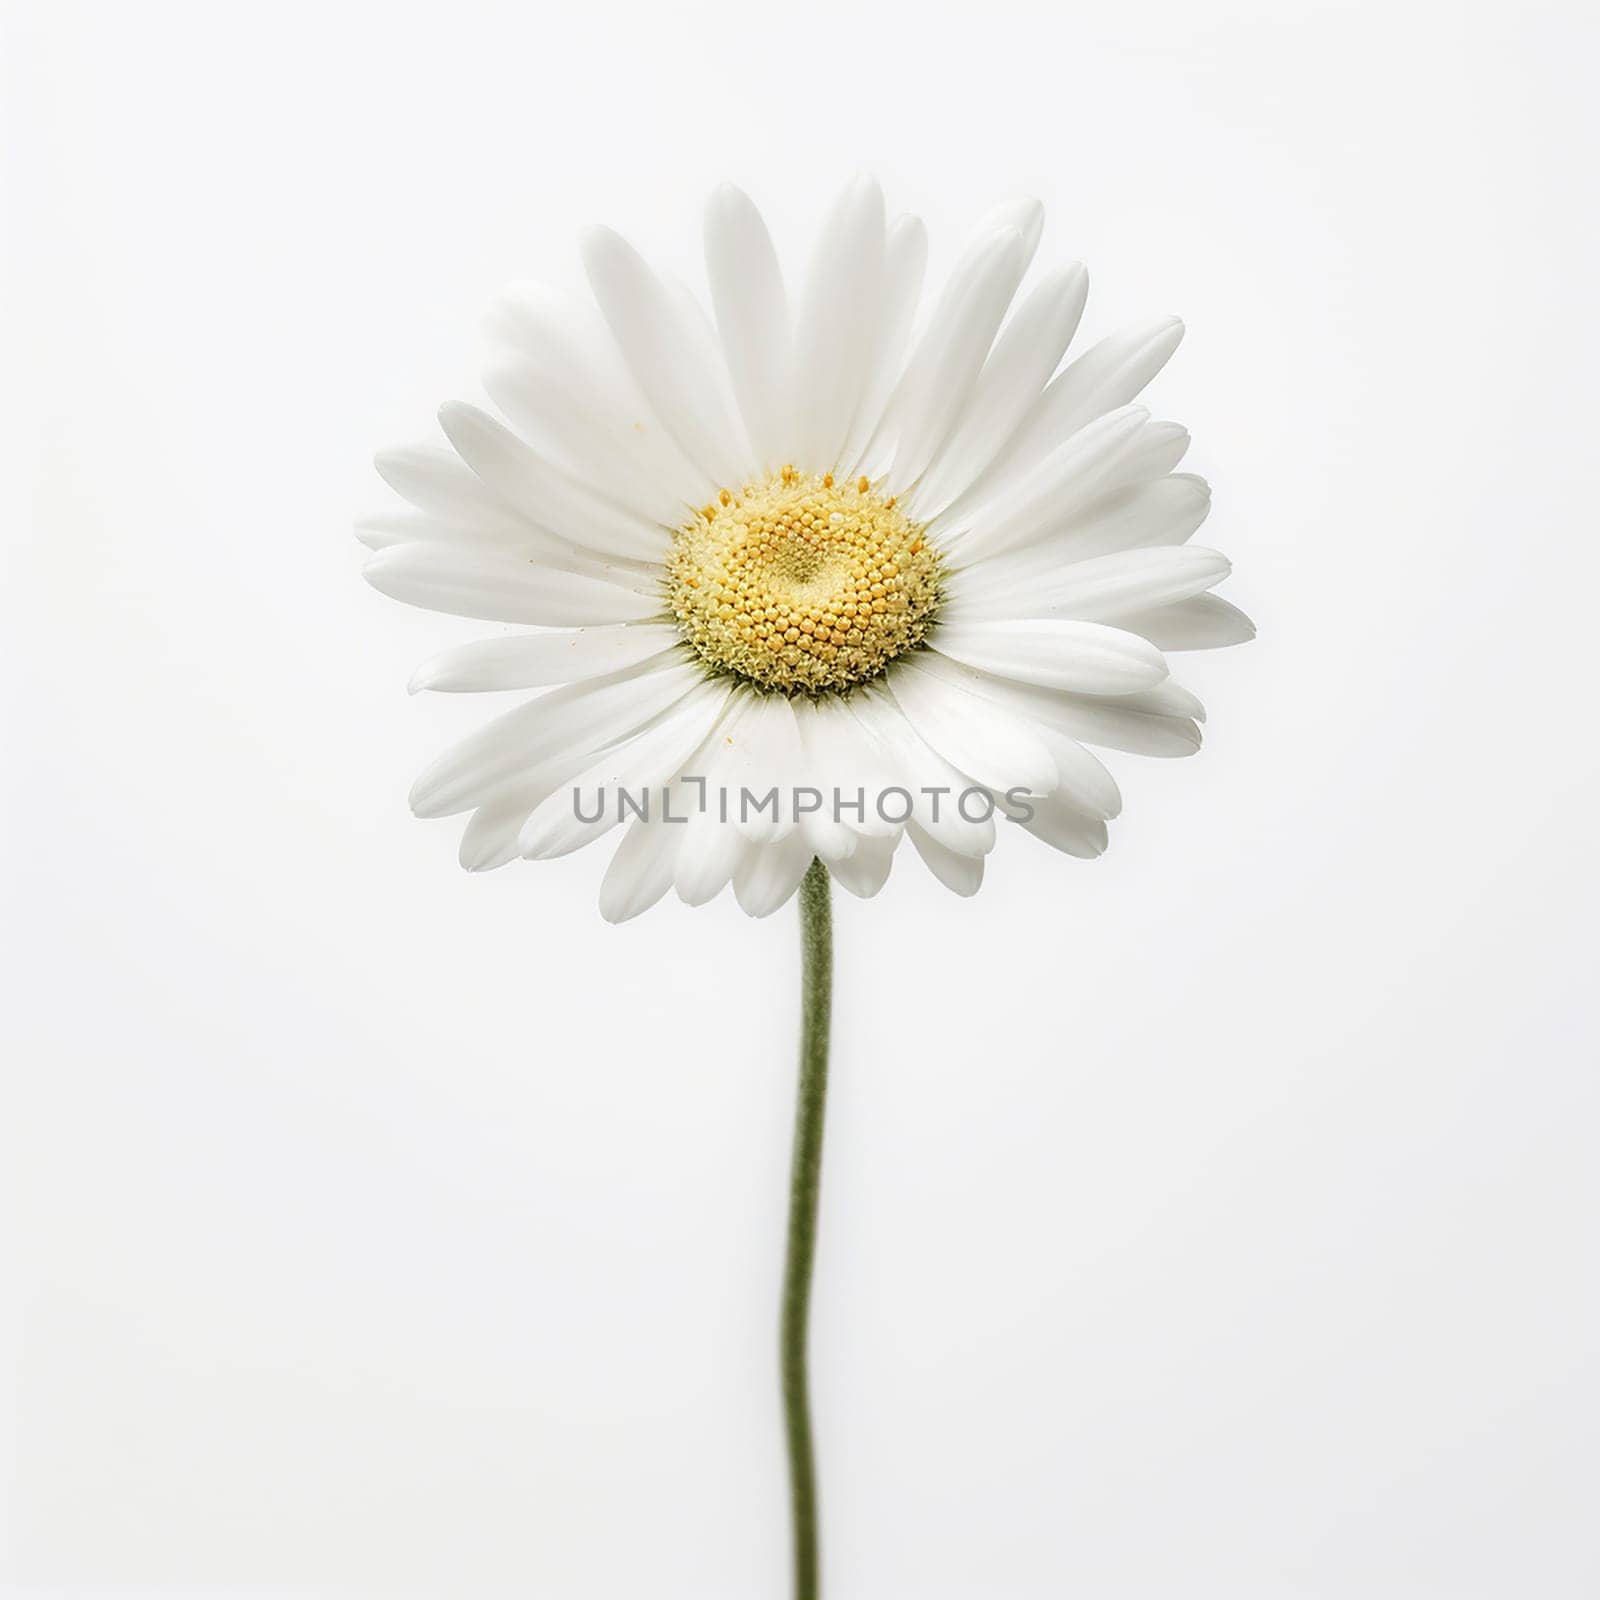 A single white daisy against a plain white background, simple and elegant. by Hype2art